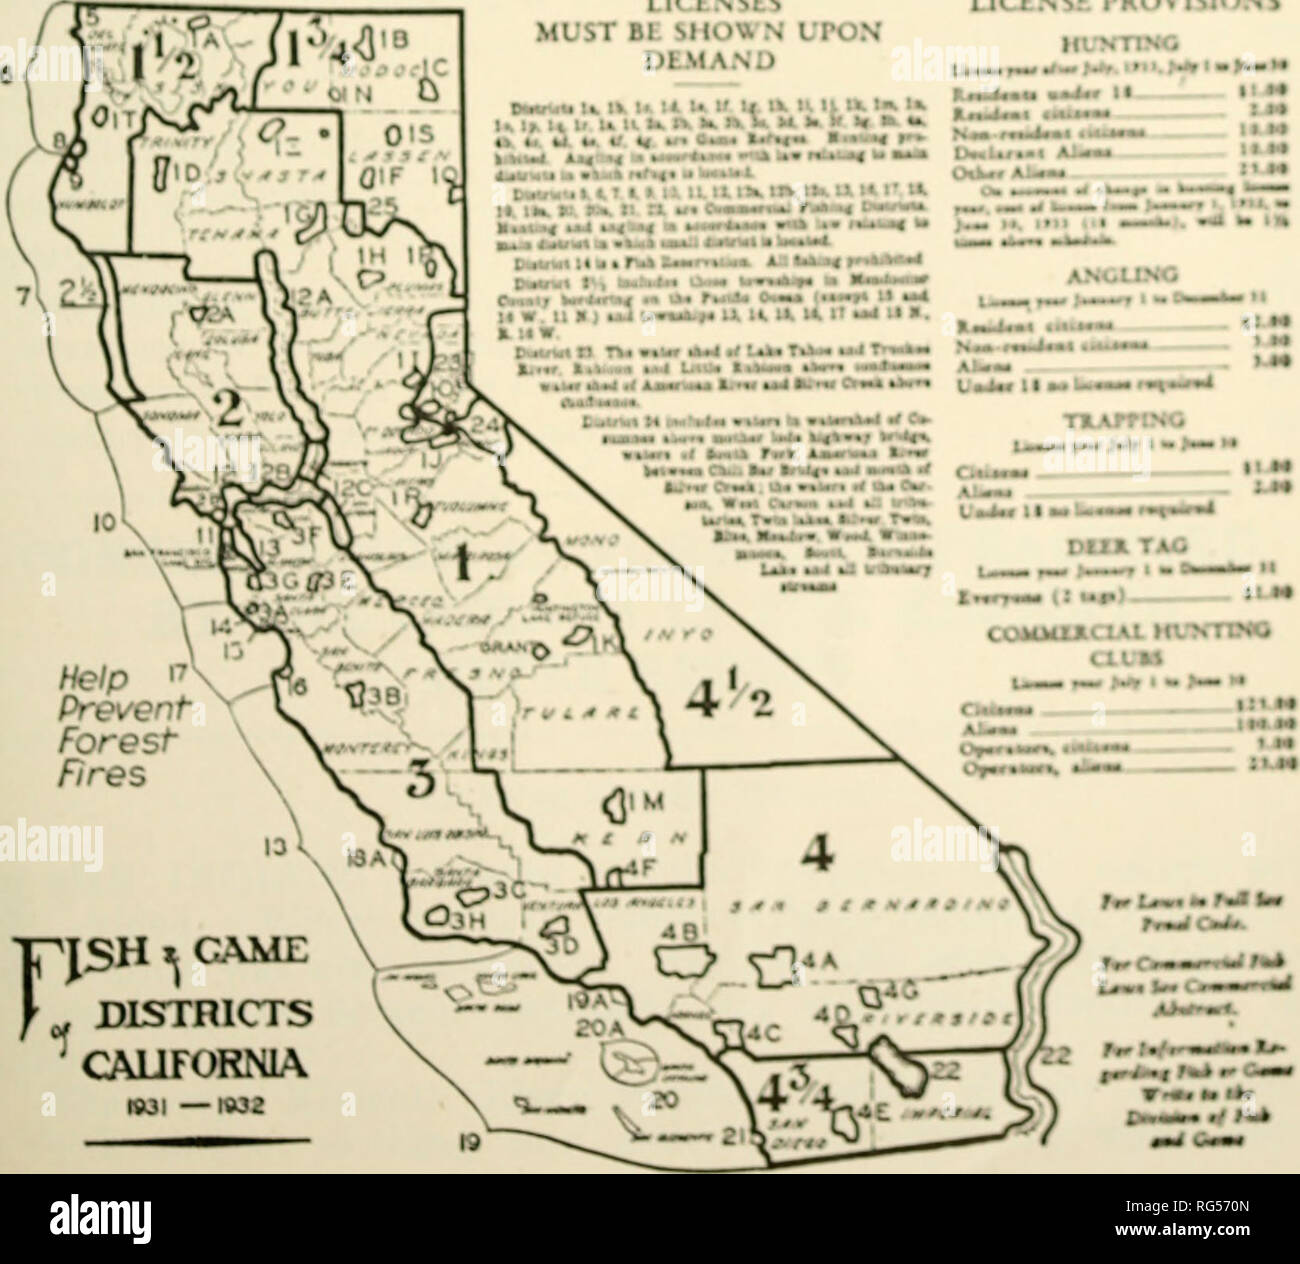 . California fish and game. Fisheries -- California; Game and game-birds -- California; Fishes -- California; Animal Population Groups; PÃªches; Gibier; Poissons. --â -â - â t Â»l To 1 ^, Â«uÂ» Â«/ tl T. - â¢â¢-â Â«:-â¢ Â»-Â«Â»-**Â«Â«ti â¢M fc â¢i*(* t-- II. lit, '^â¢'^ Â«l : WtÂ« hÂ«*o III.. .11., IÂ« 1: â¢n4 -' 10 â U In llM luna Li Â» iij .w 1. *.i ; â¢;;[*. r t * :â¢â¢ wf hm^* than ) huuki. SI Tu h*v&lt; ! anr Hah irxr w (*n (â¢â¢'â¢Â«&lt; ^ Un&lt;liff UA.Â»w(ul to sp*- 11 3Â» T.. I.W.- Â» 'i^a Â»lÂ«Â».Ln !&quot;) ff*( .^Â» Â»Â»-Â« rrv^talll &gt;Â». i'. -â¢â¢^ o( . &gt; lÂ« wllh r H II TÂ» Stock Photo